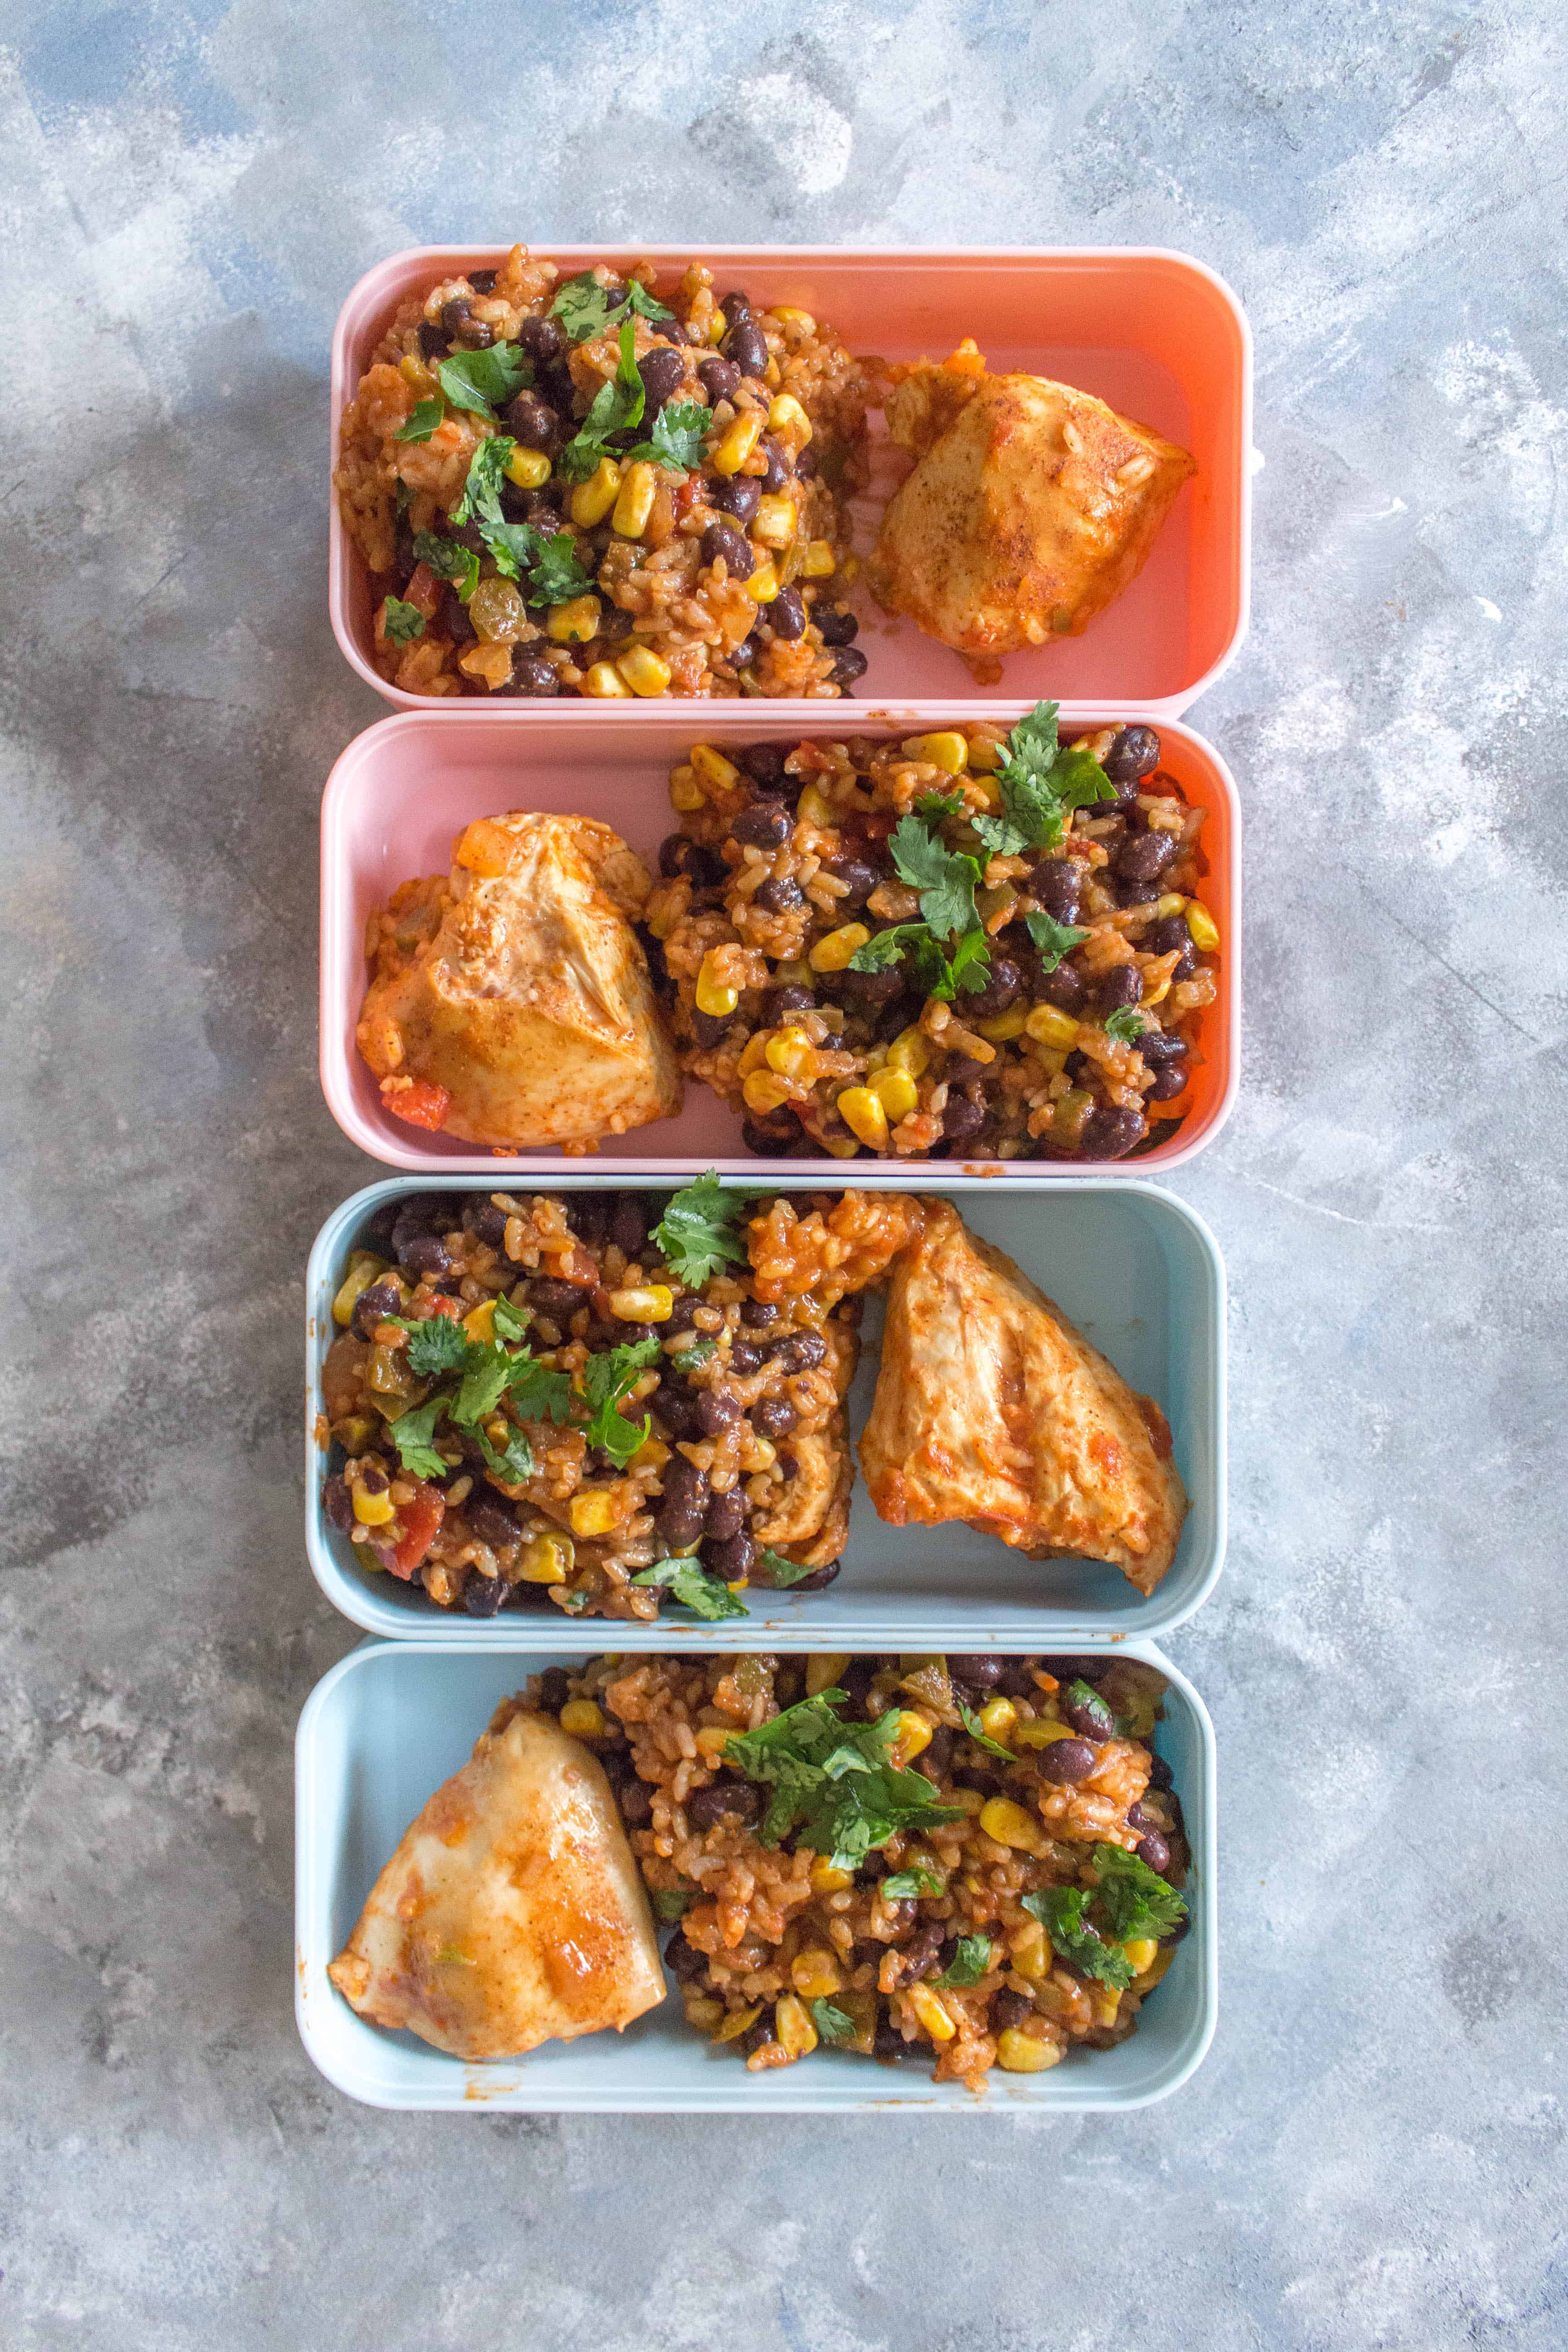 This Spicy Instant Pot Chicken and Rice Meal Prep is inspired by the chicken burrito bowls from Chipotle! It's so easy to make and takes less than 30 minutes to meal prep for four days!  #InstantPotRecipes #chickenrecipe #chipotlechicken